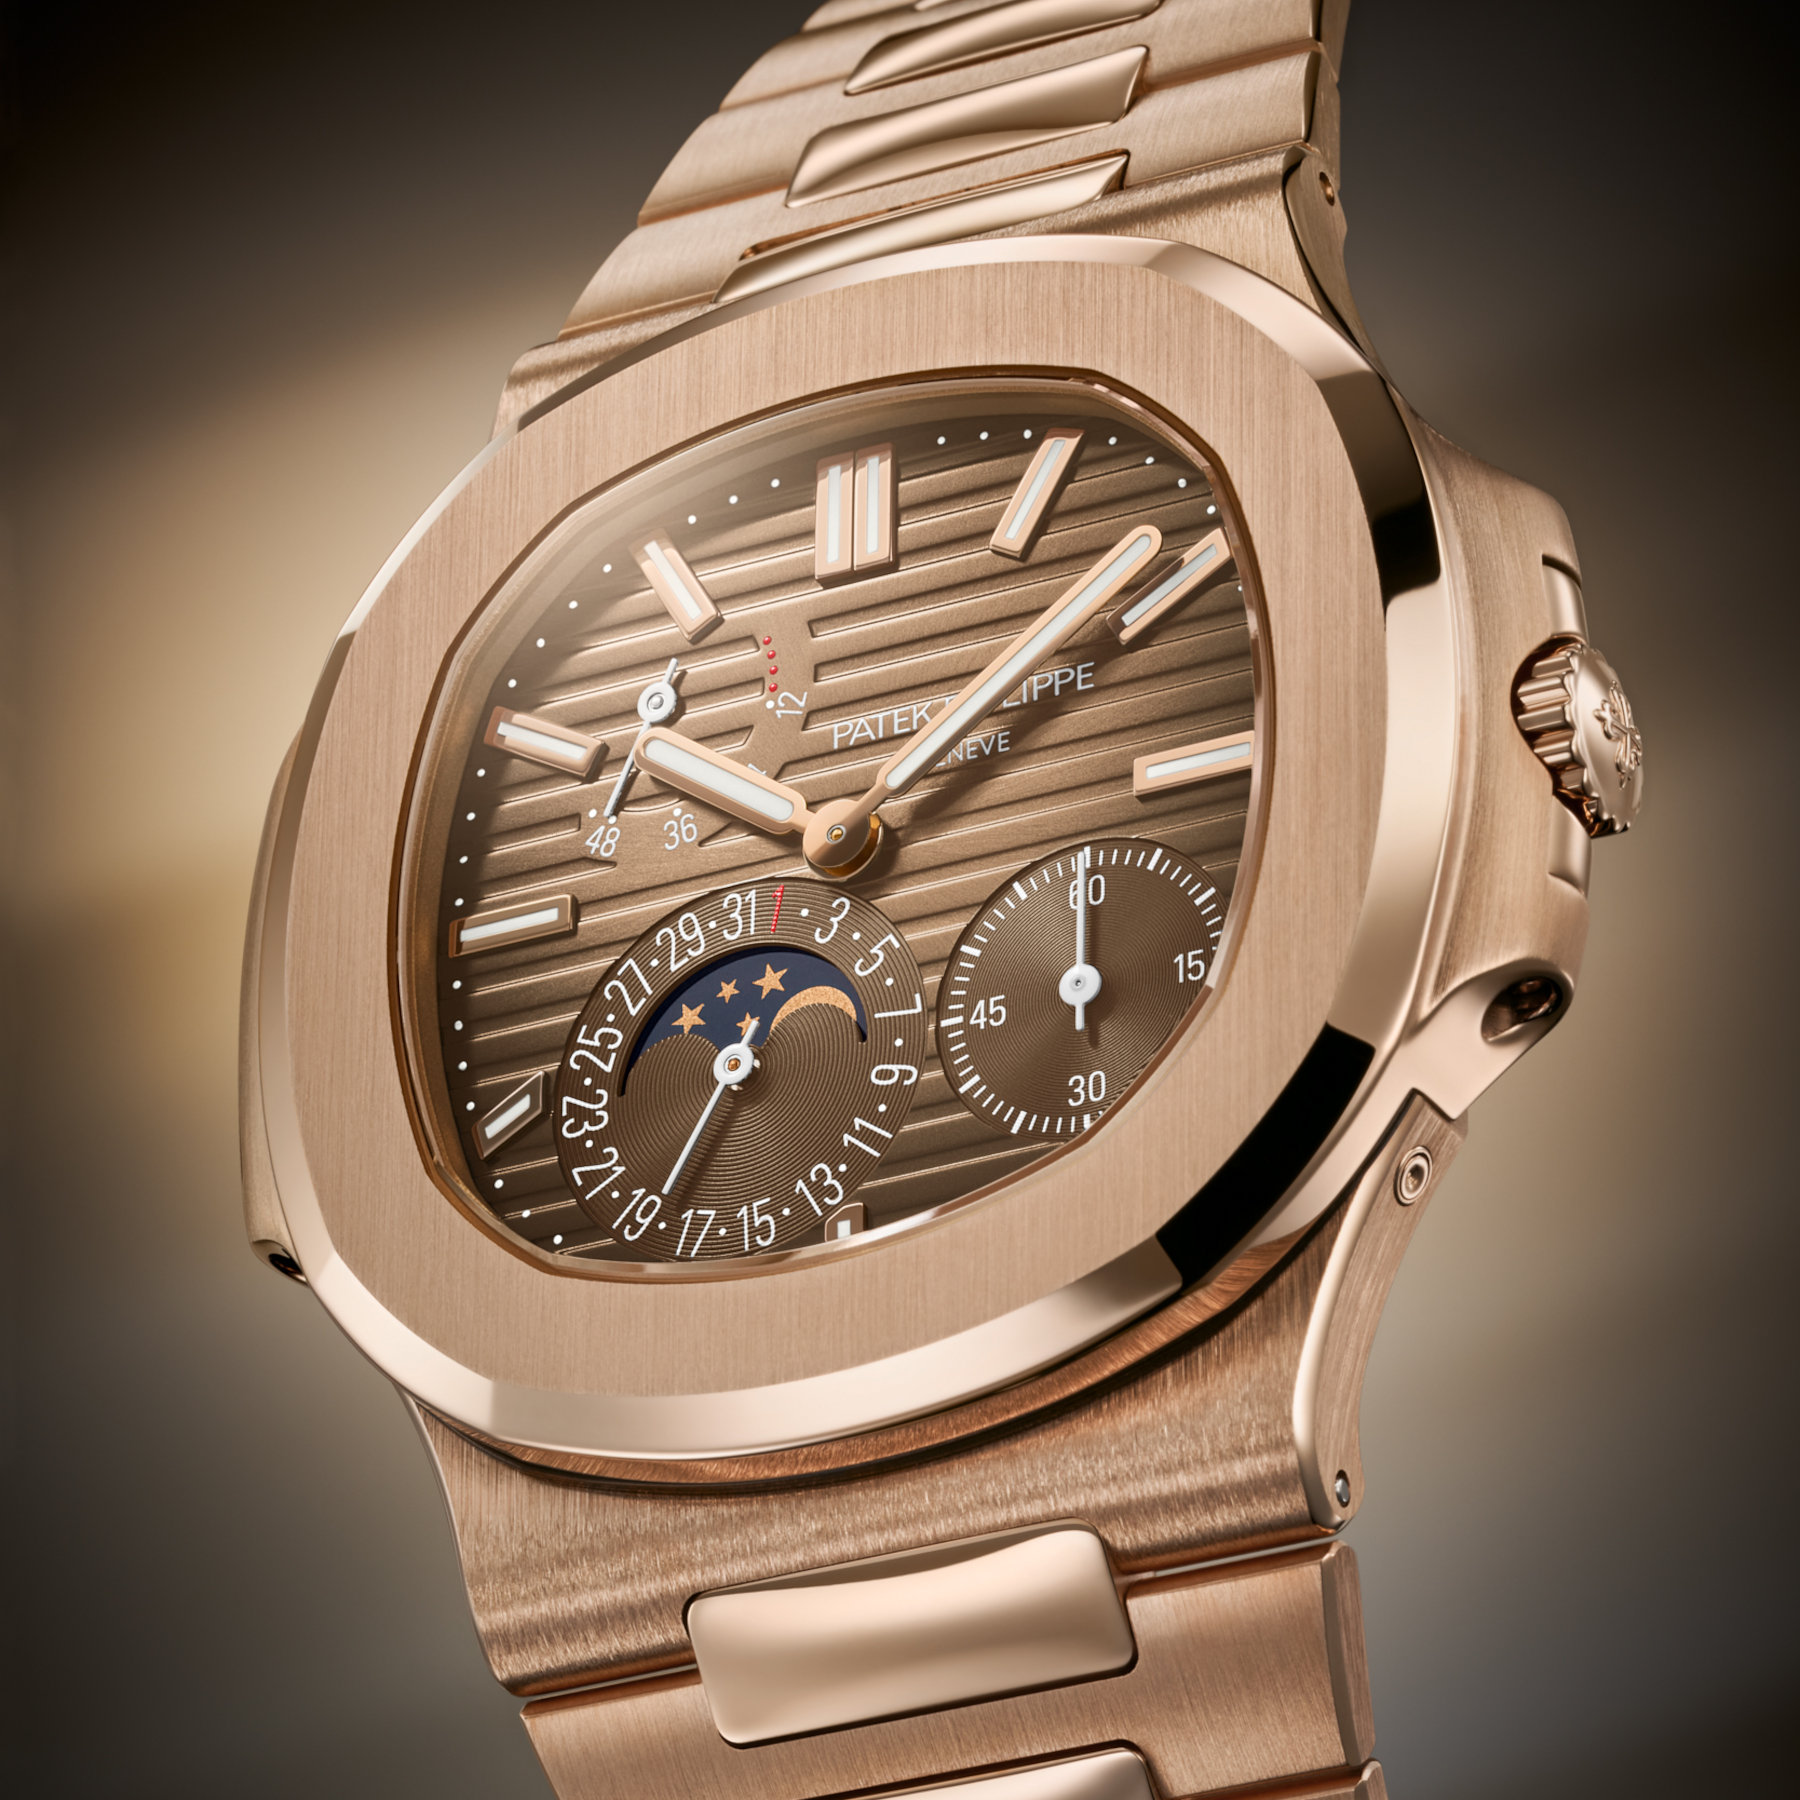 Patek Philippe Nautilus 5711 Rose Gold Watch – WristReview.com – Featuring  Watch Reviews, Critiques, Reports & News